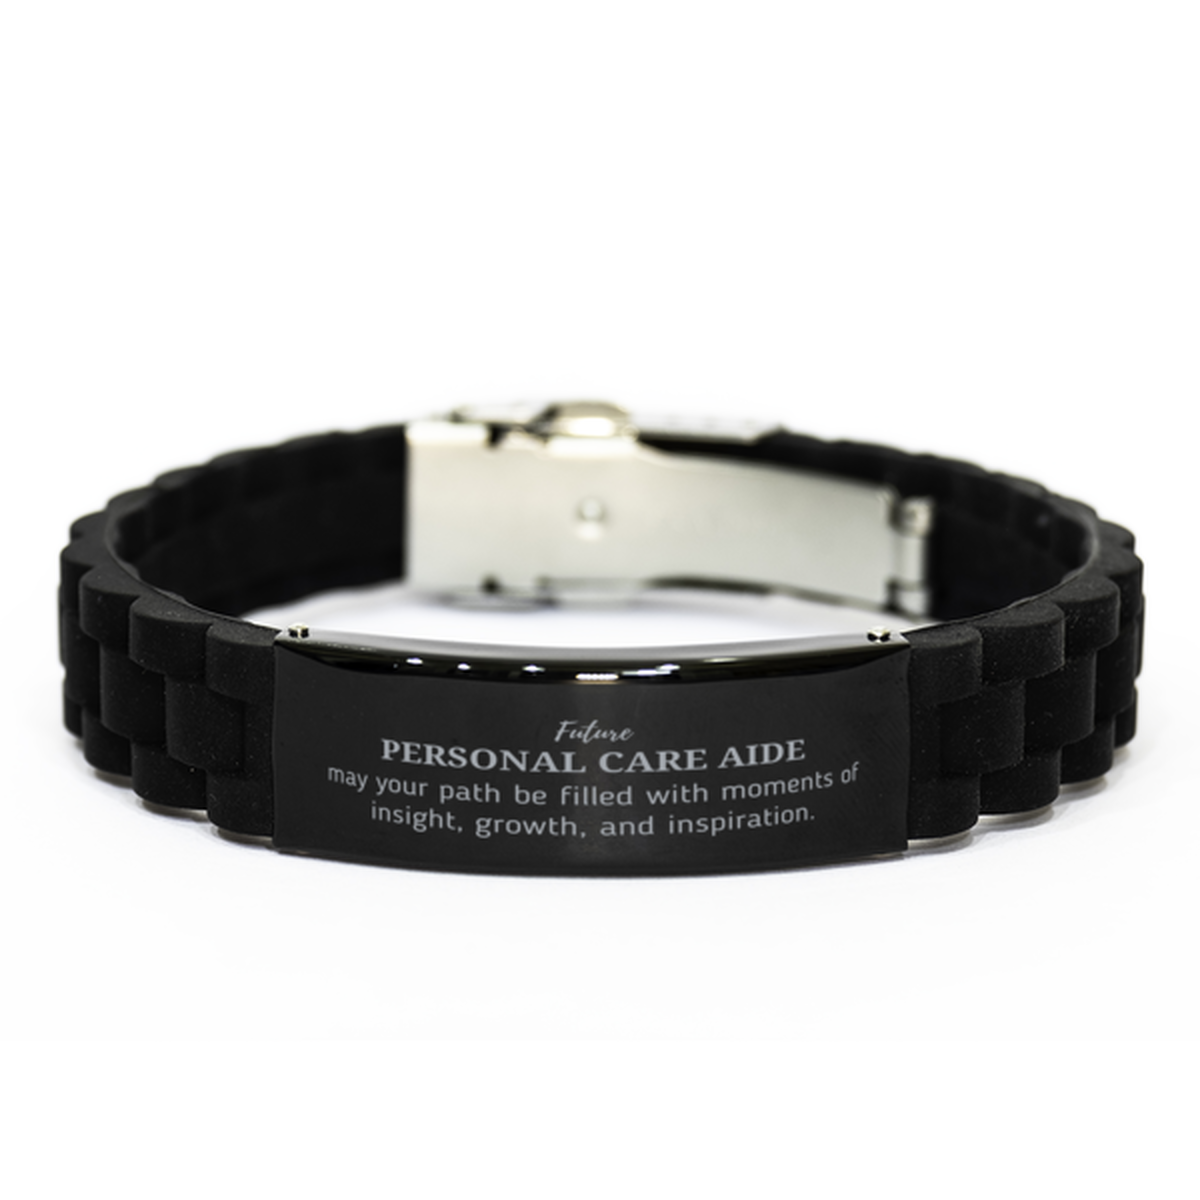 Future Personal Care Aide Gifts, May your path be filled with moments of insight, Graduation Gifts for New Personal Care Aide, Christmas Unique Black Glidelock Clasp Bracelet For Men, Women, Friends